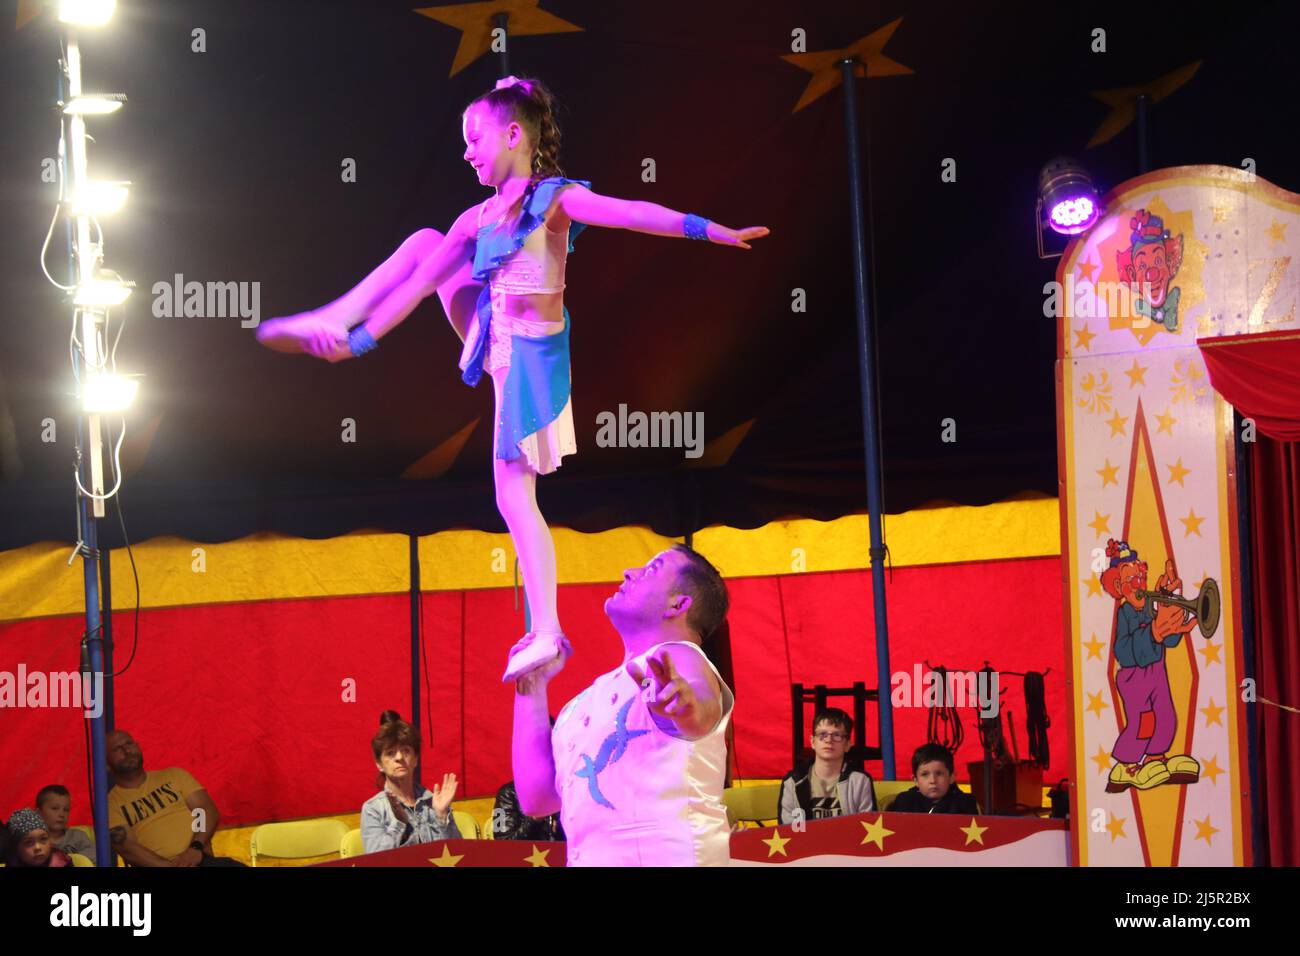 Members of Circus Trumpf entertaining with a presentation in Göttingen,  Germany on Sunday. All members of a family (Angelika Renz, Celina, Leroy,  Simon Renz, Daniela Lutzny and Milena) participate in this circus. (